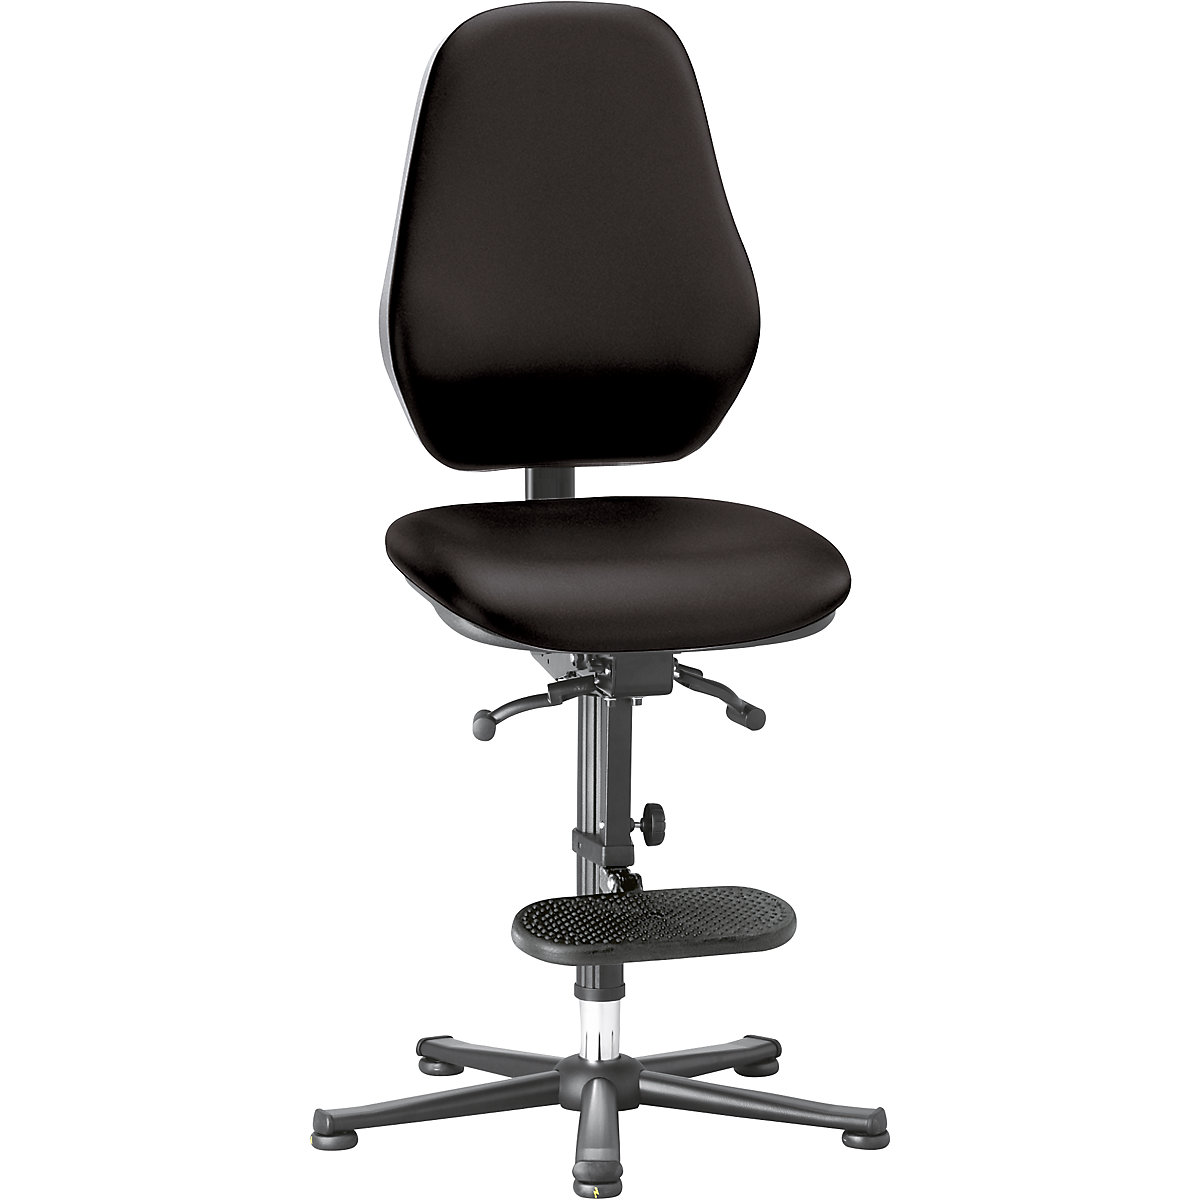 Industrial swivel chair – bimos, with ESD protection, with synchronous mechanism and weight adjustment, floor glides, step-up, black vinyl covering-10